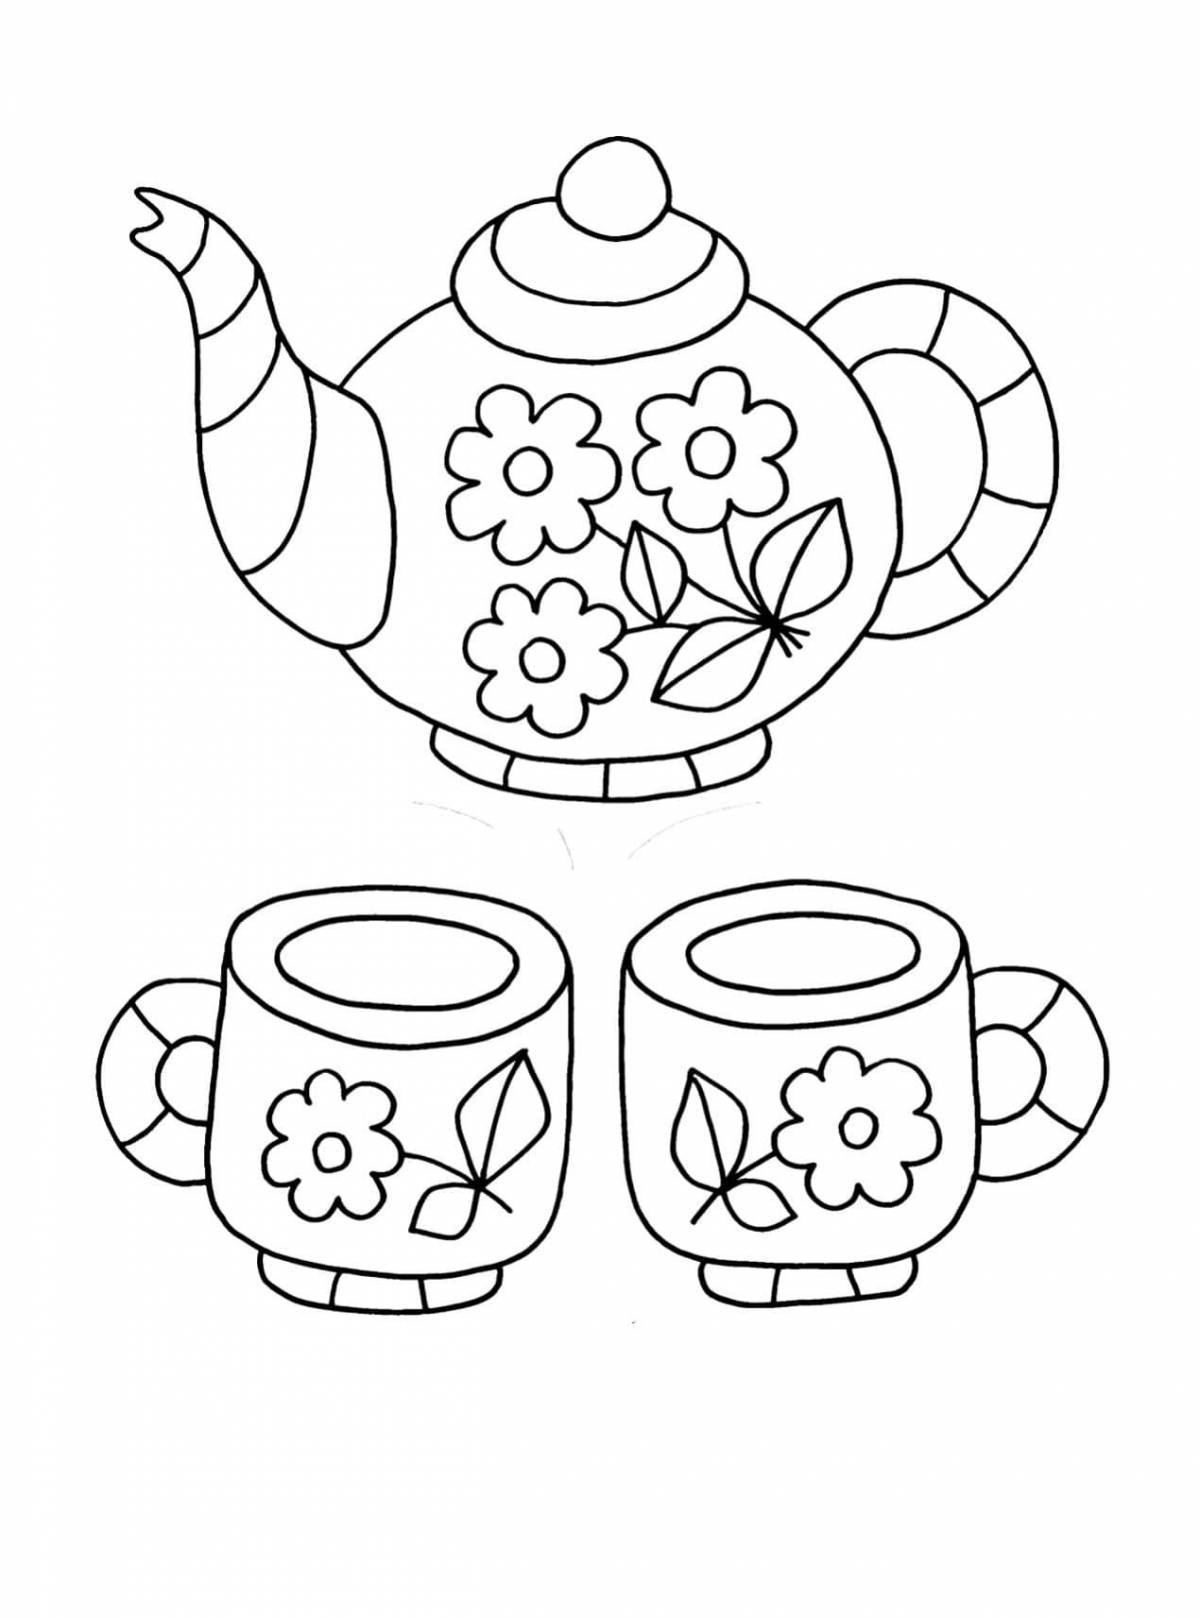 Great tea set coloring page